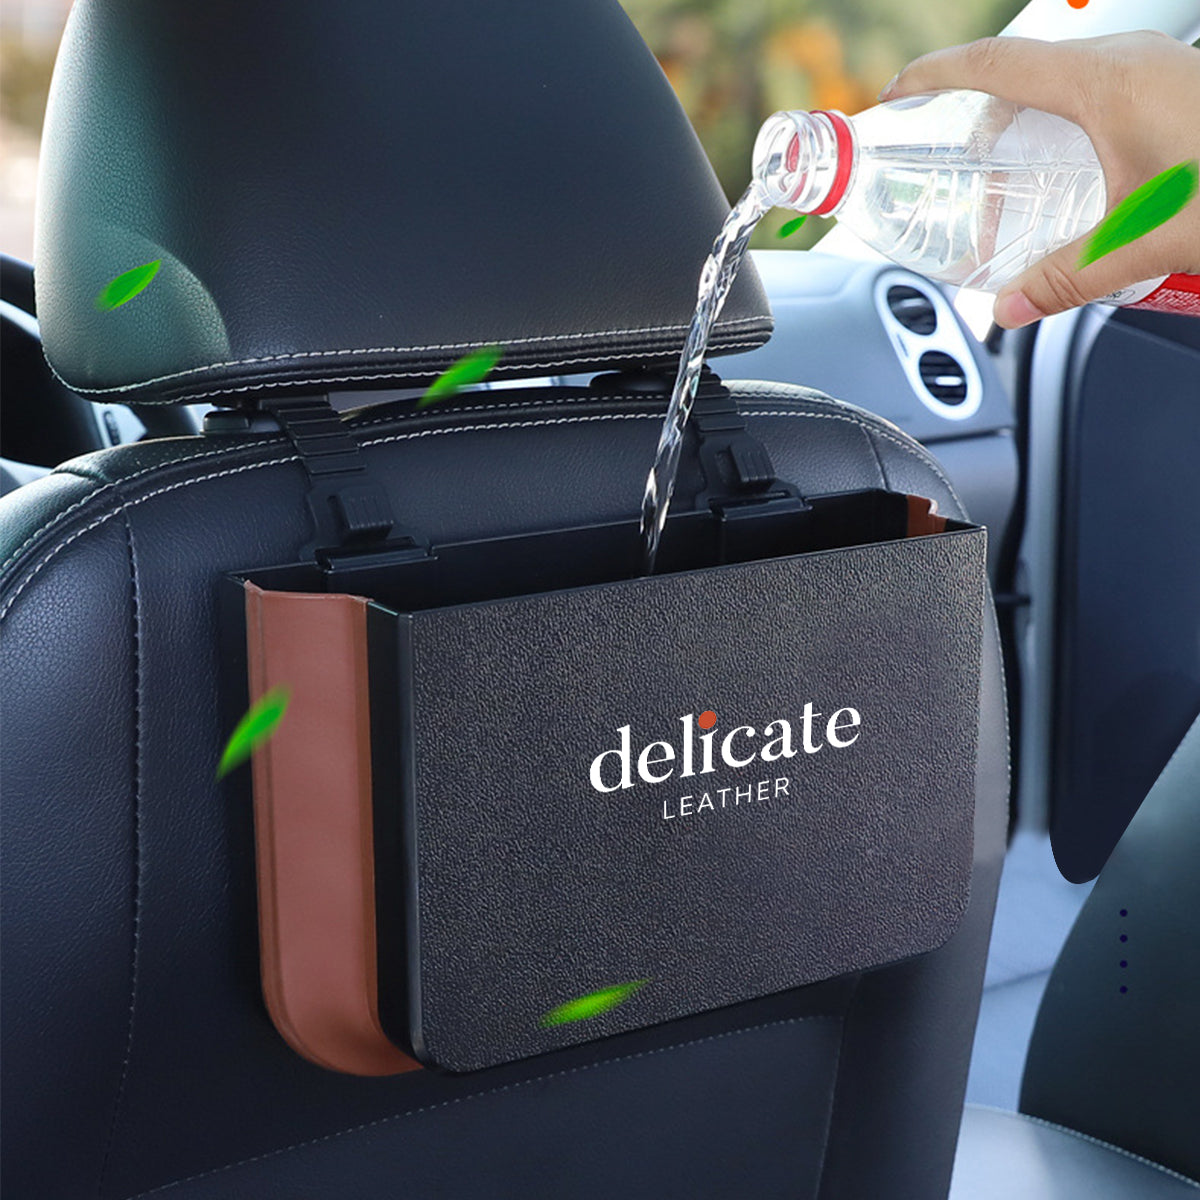 Hanging Waterproof Car Trash can-Foldable, Custom For Your Cars, Waterproof, and Equipped with Cup Holders and Trays. Multi-Purpose, Car Accessories MT11992